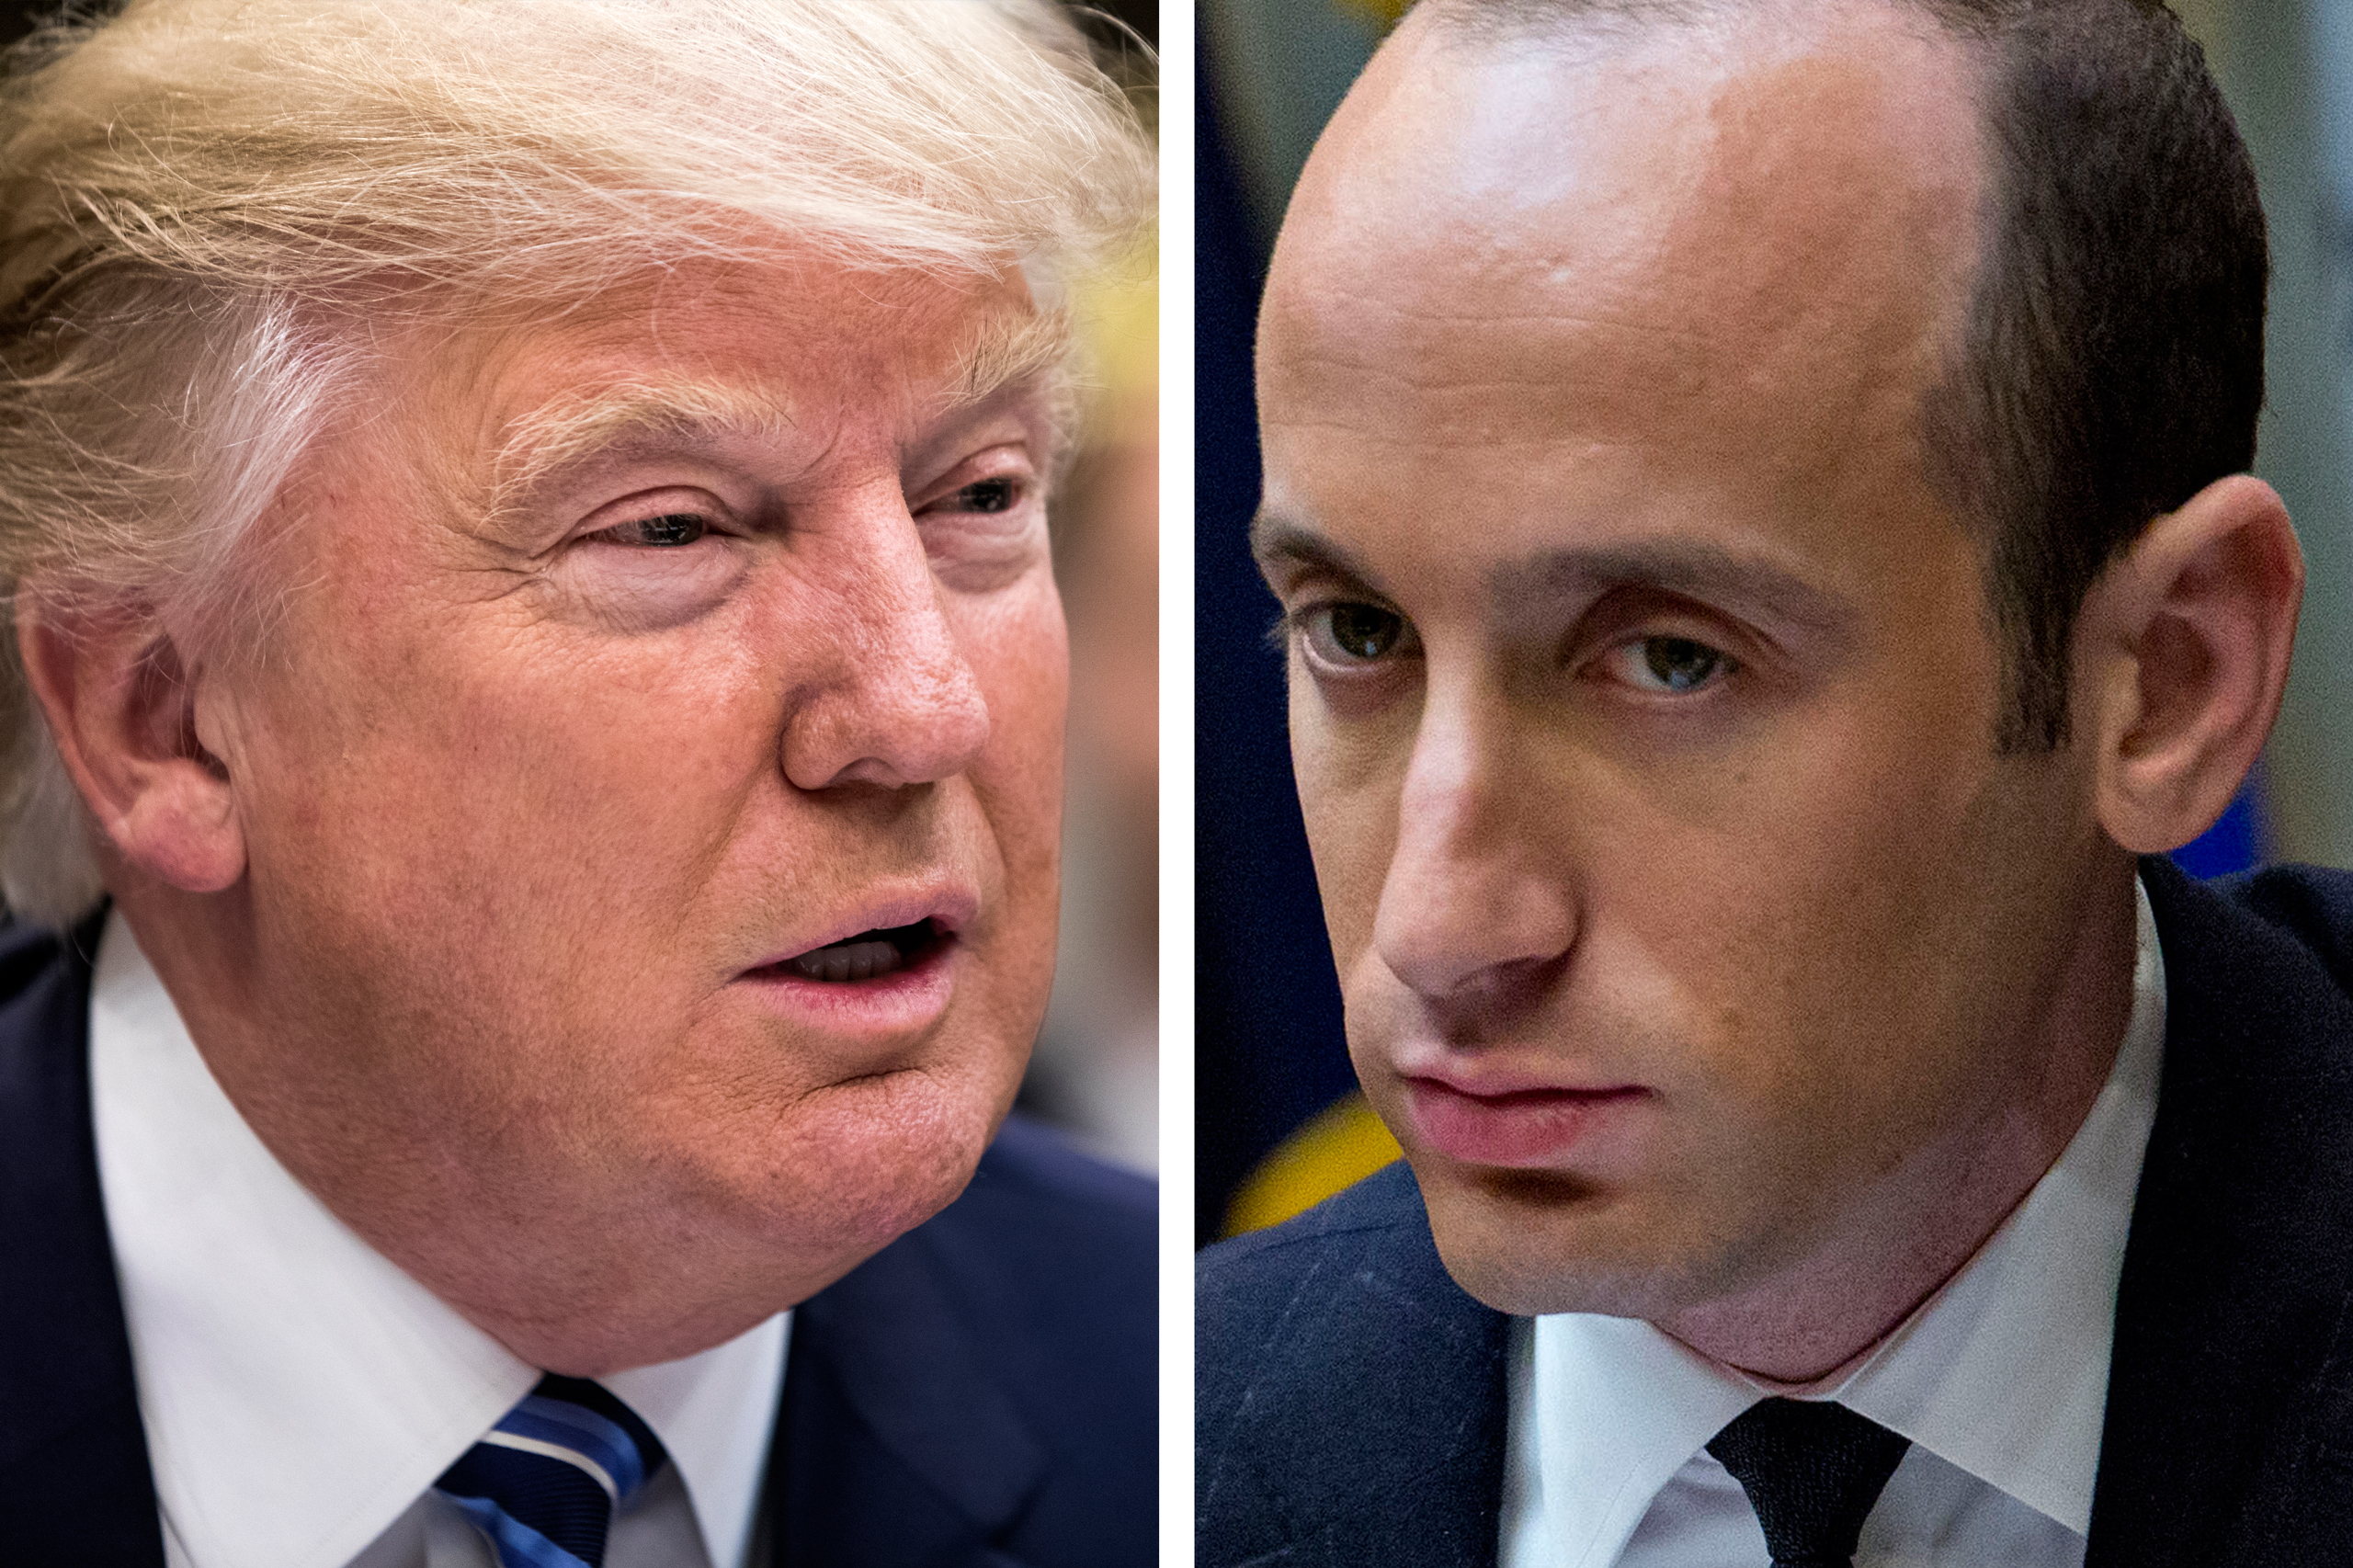 <i>Left</i>: President Donald Trump in the Roosevelt Room of the White House in Washington on Feb. 9, 2017;  <i>Right</i>: Stephen Miller, White House senior advisor for policy, during a meeting of small business leaders in the Roosevelt Room of the White House in Washington on Jan. 30, 2017. (Jim Lo Scalzo—Bloomberg/Getty Images; Andrew Harrer/picture-alliance/dpa/AP)